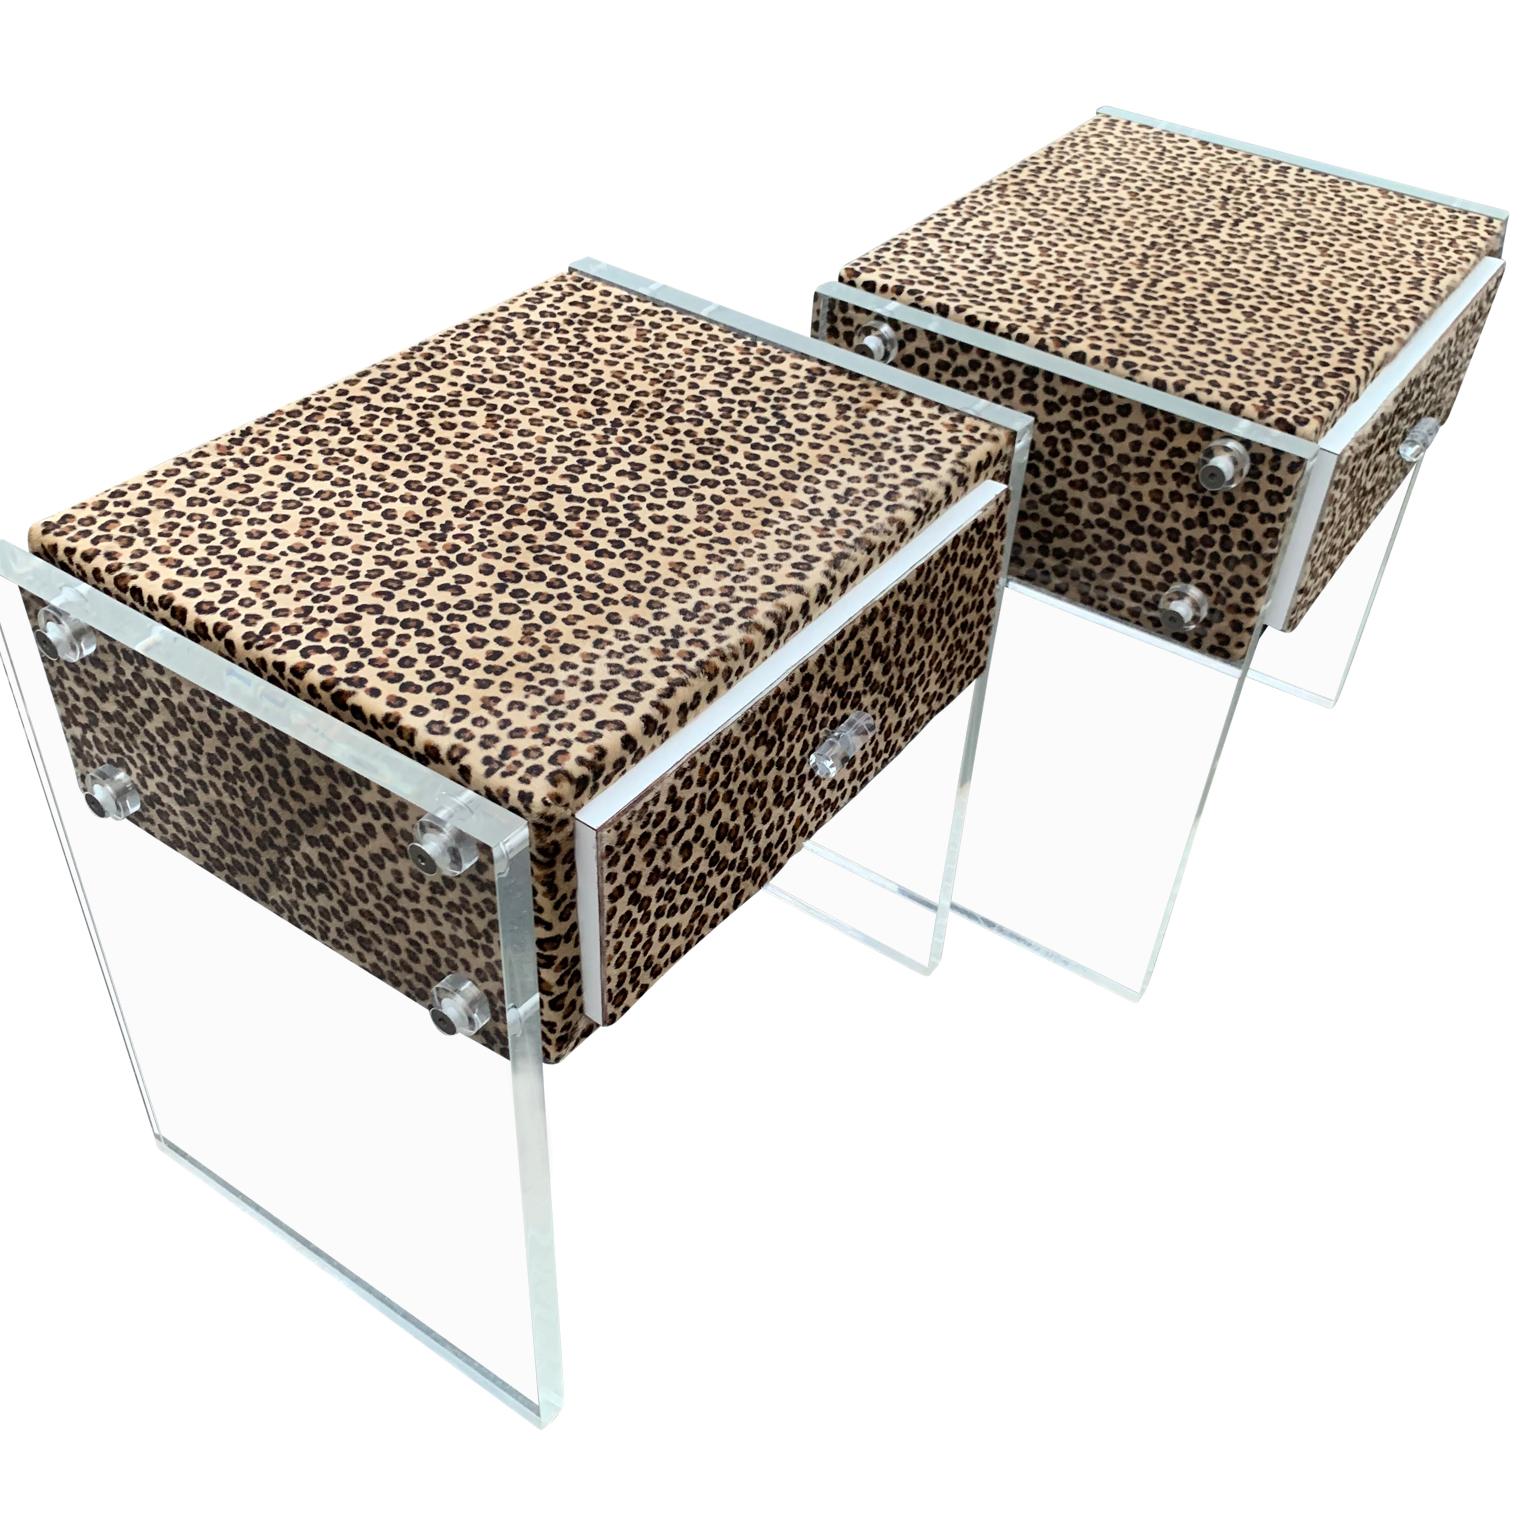 Pair of Faux Cheetah Skin Upholstered Nightstands with Lucite Side Panels 4